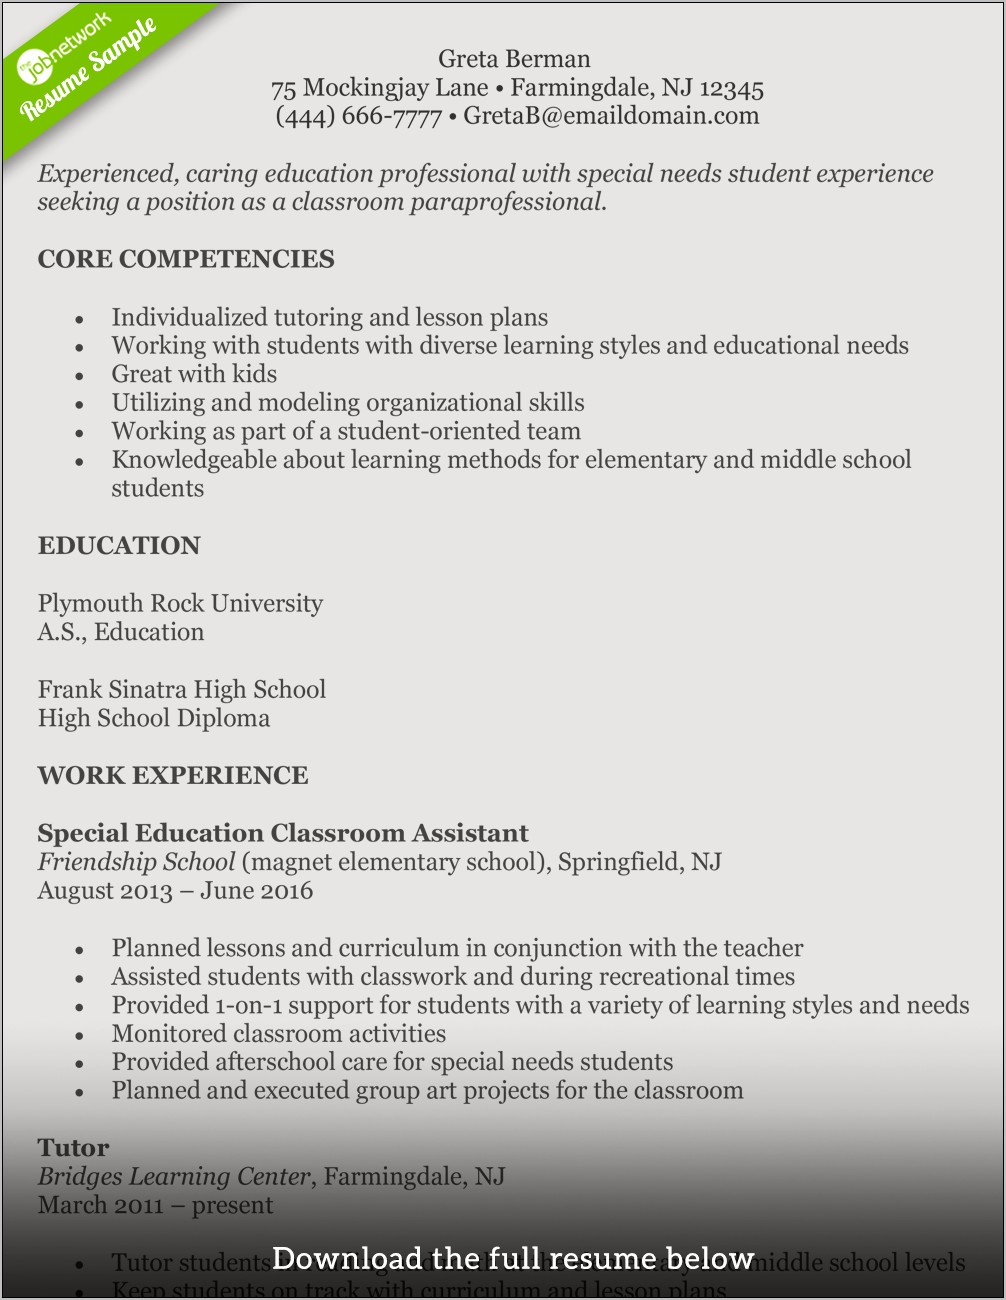 Sample Resume Objective For A Teaching Position